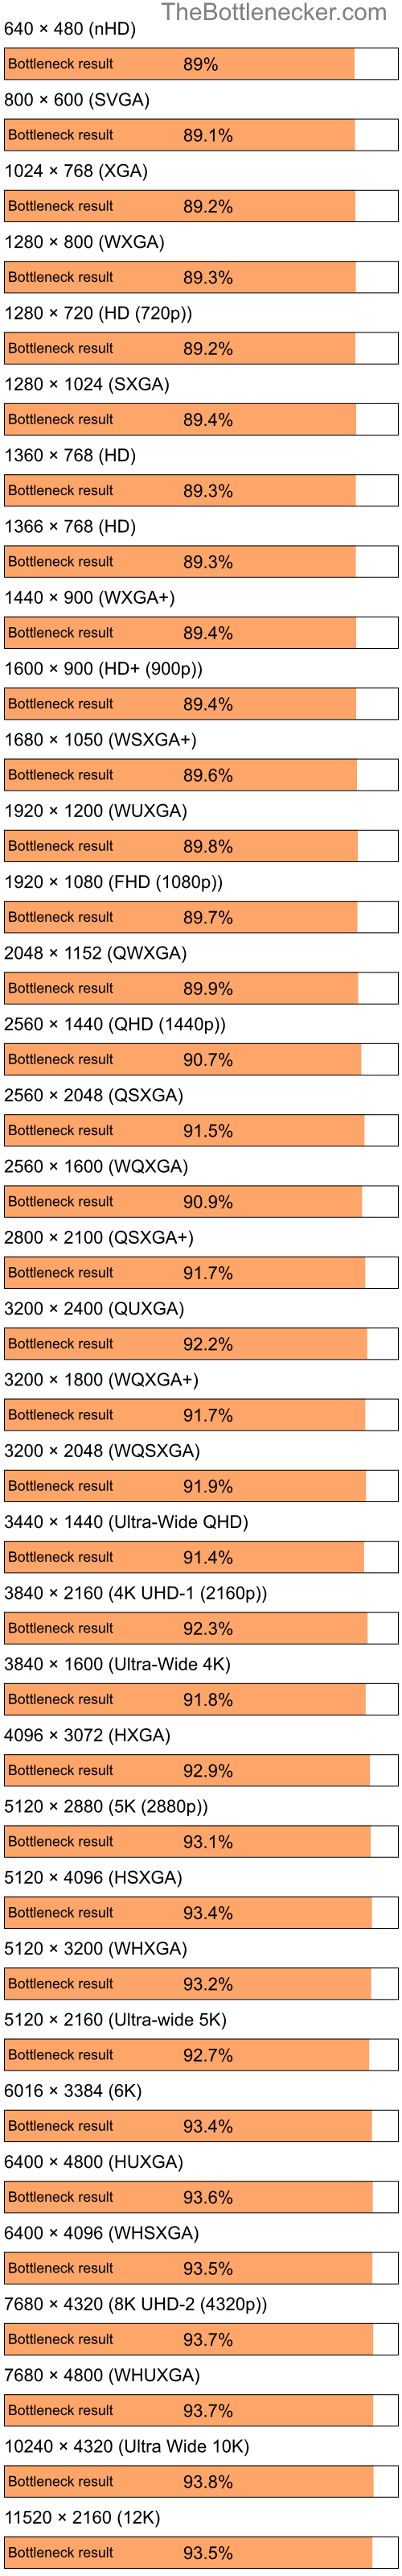 Bottleneck results by resolution for Intel Atom Z520 and AMD Mobility Radeon 9200 in Processor Intense Tasks